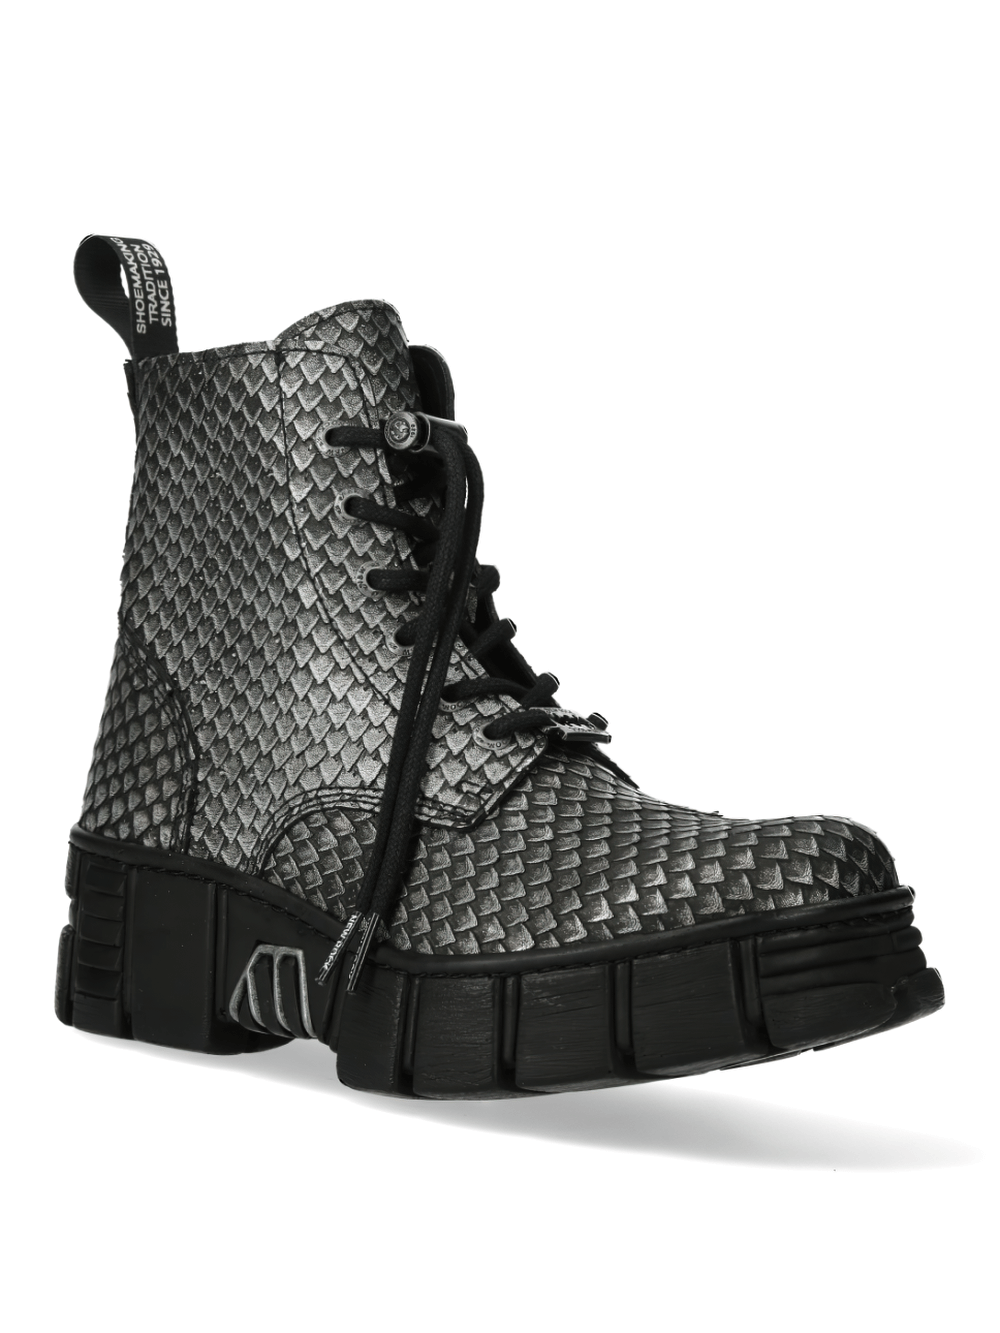 NEW ROCK Urban Textured Scale Black Lace-Up Boots